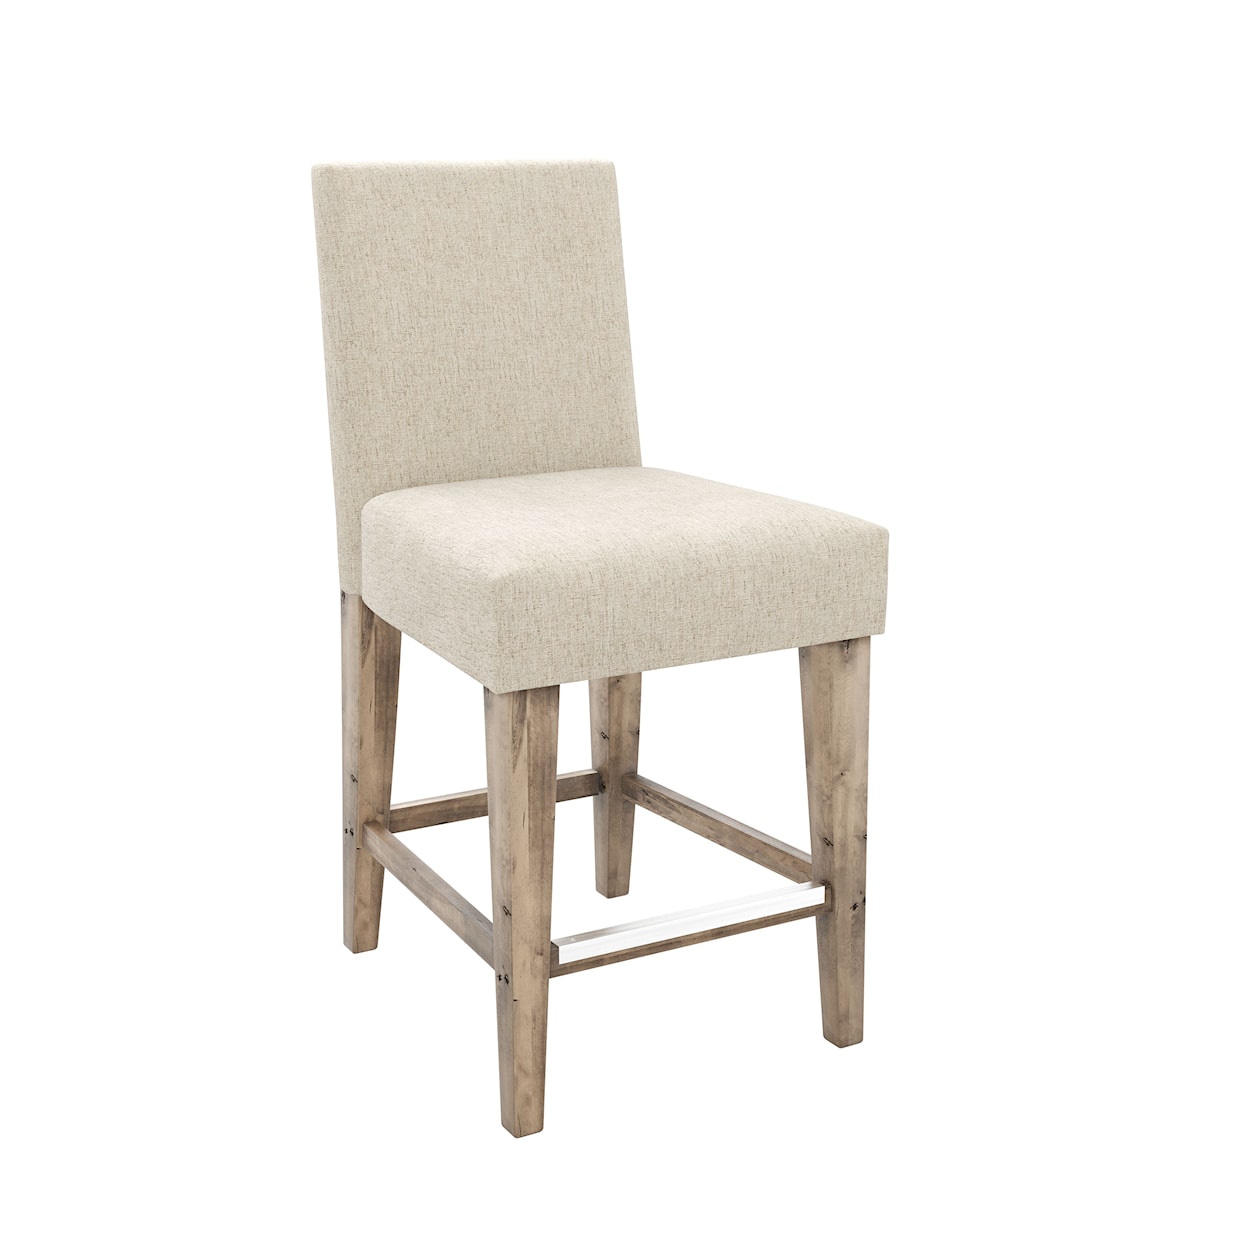 Canadel East Side Upholstered fixed stool